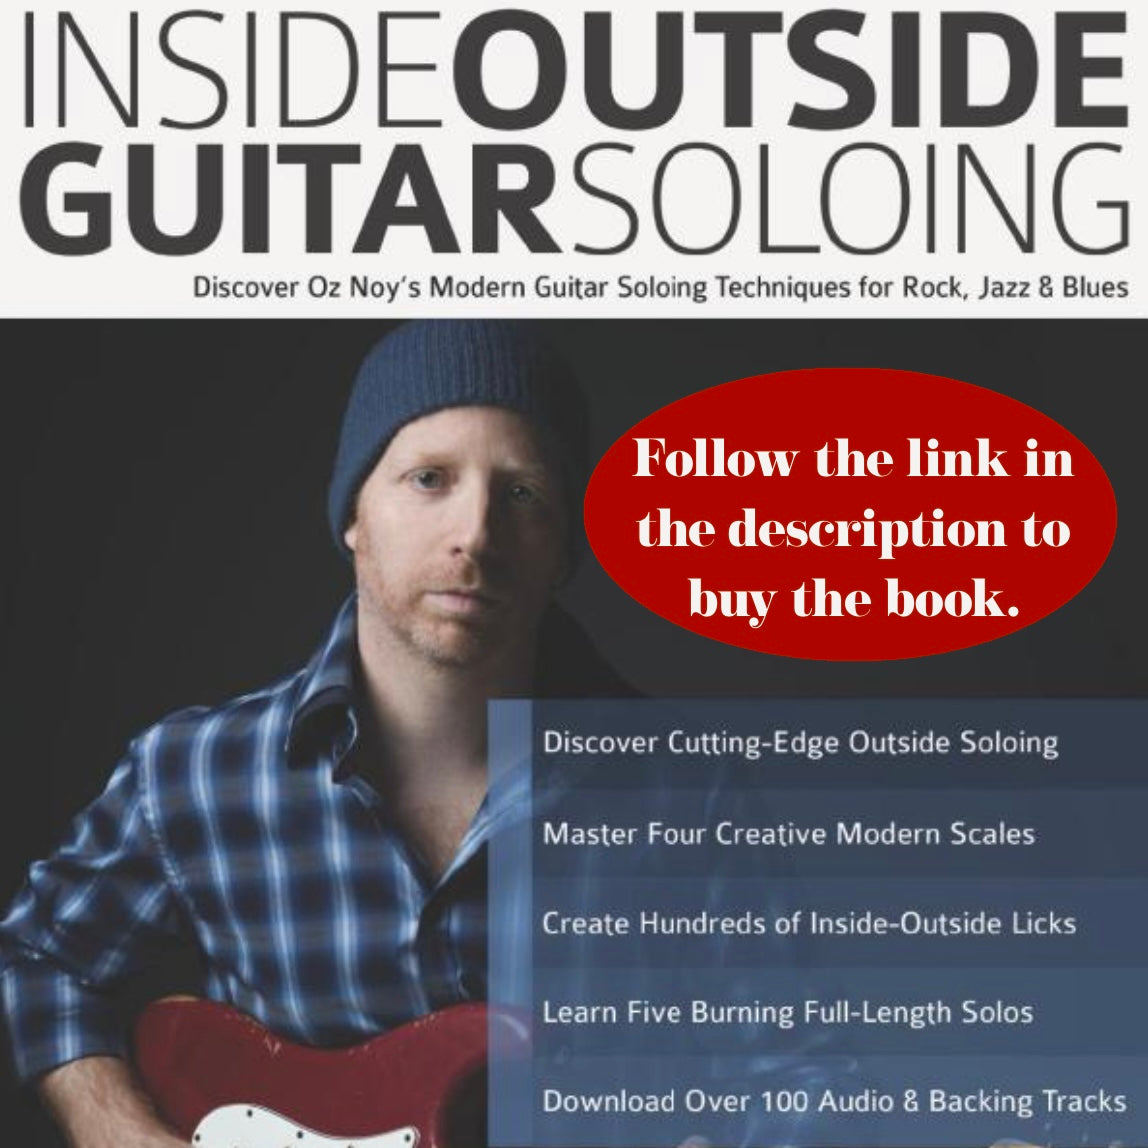 Oz Noy’s Inside Outside Guitar Soloing: follow the link in the description to buy the book